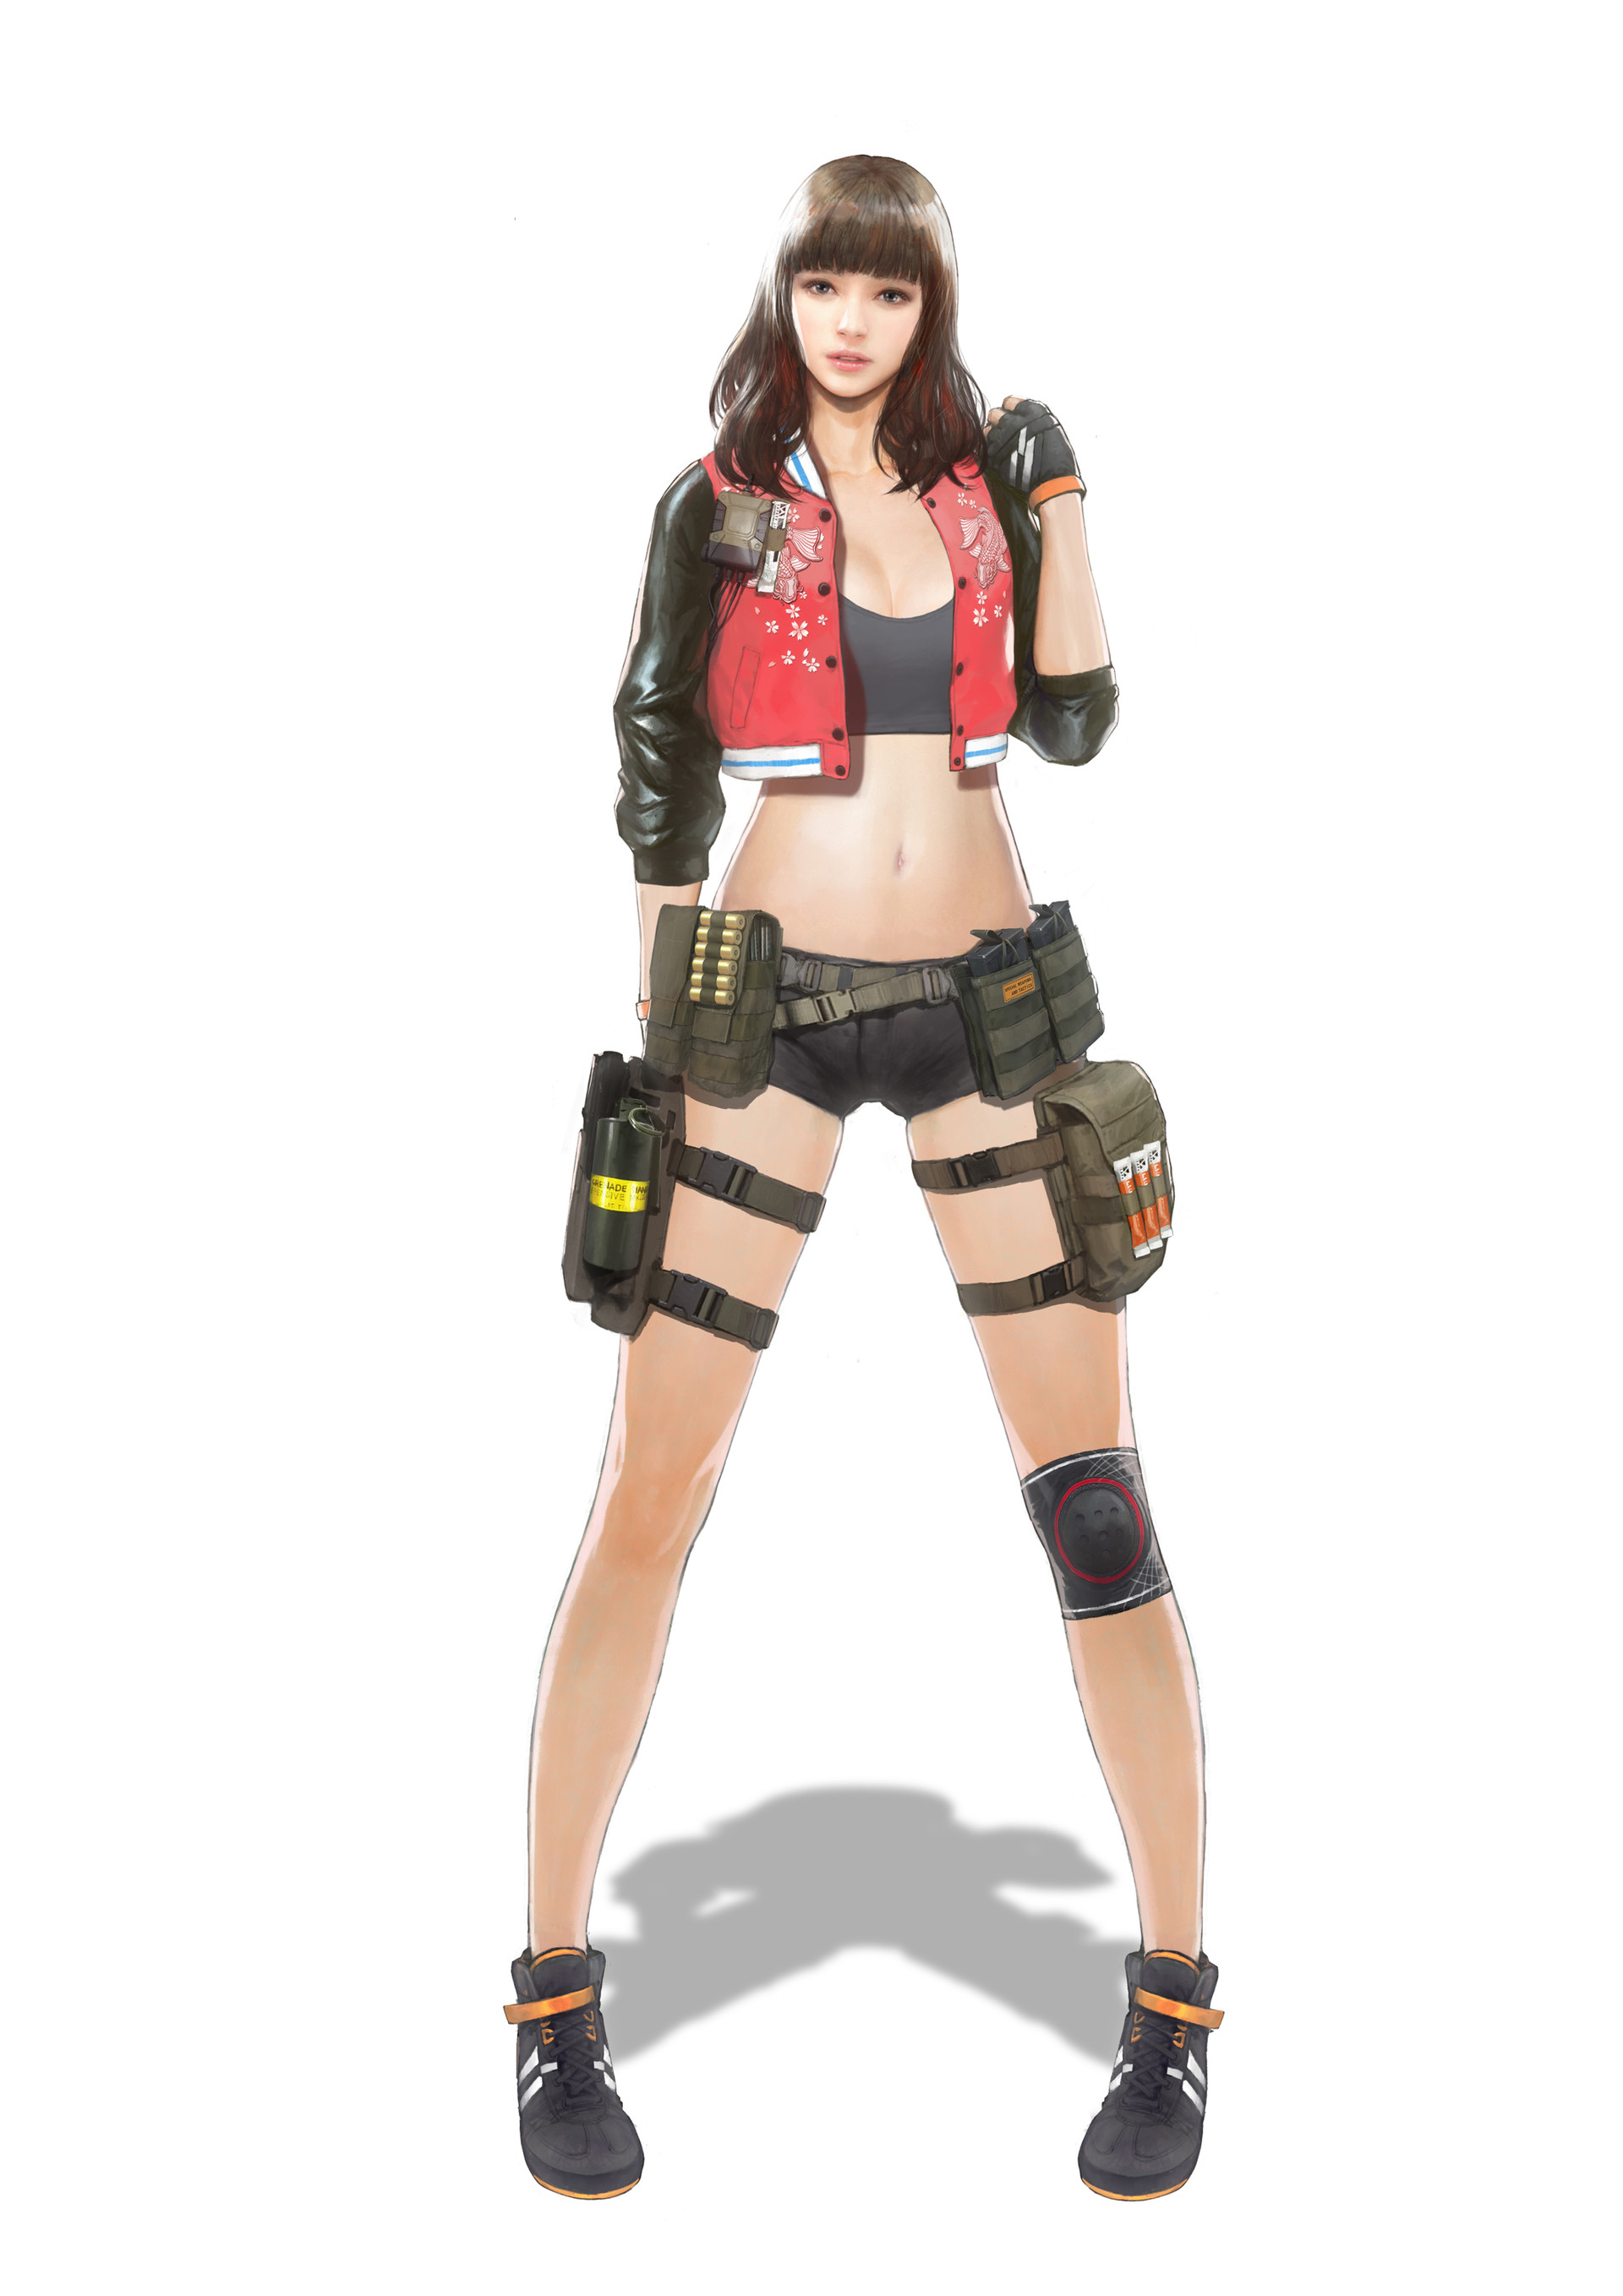 Official DigitalEro  View topic - Sudden Attack 2 Models